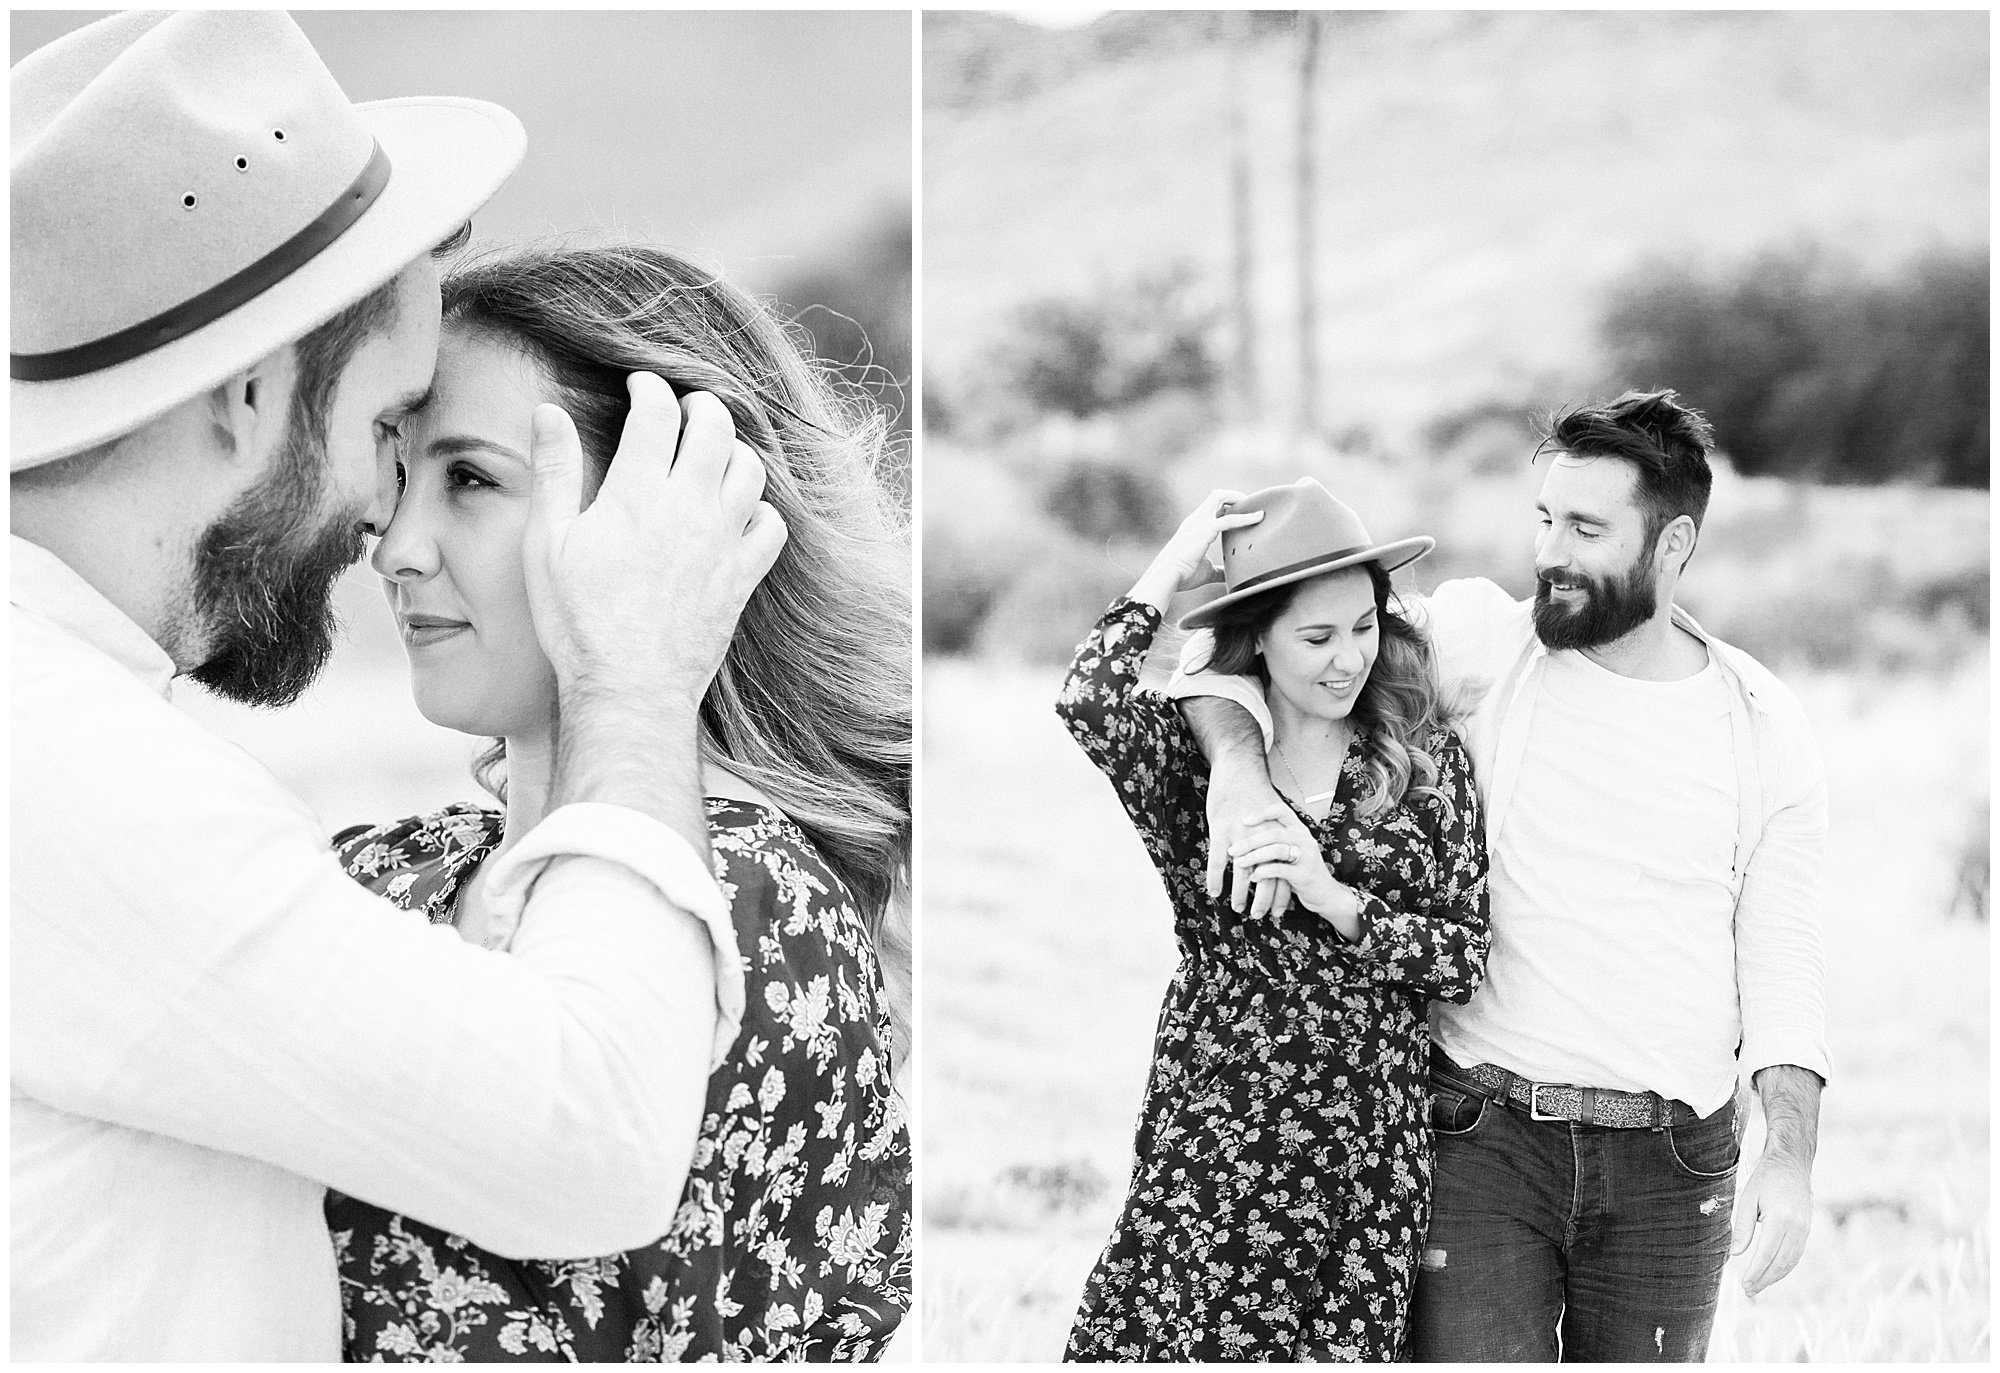 Palm Springs engagement photography. Palm springs photographer, La quinta wedding photographer, desert engagement photos, how to plan a desert photoshoot, coachella photographer, palm springs wedding photographer, palm springs vibes, desert wedding photos, saguaro wedding photographer, palm desert wedding photos, palm desert engagement photos, ace hotel photographer, joshua tree engagement photos, windmill engagement photos, what to wear for your desert engagement photos